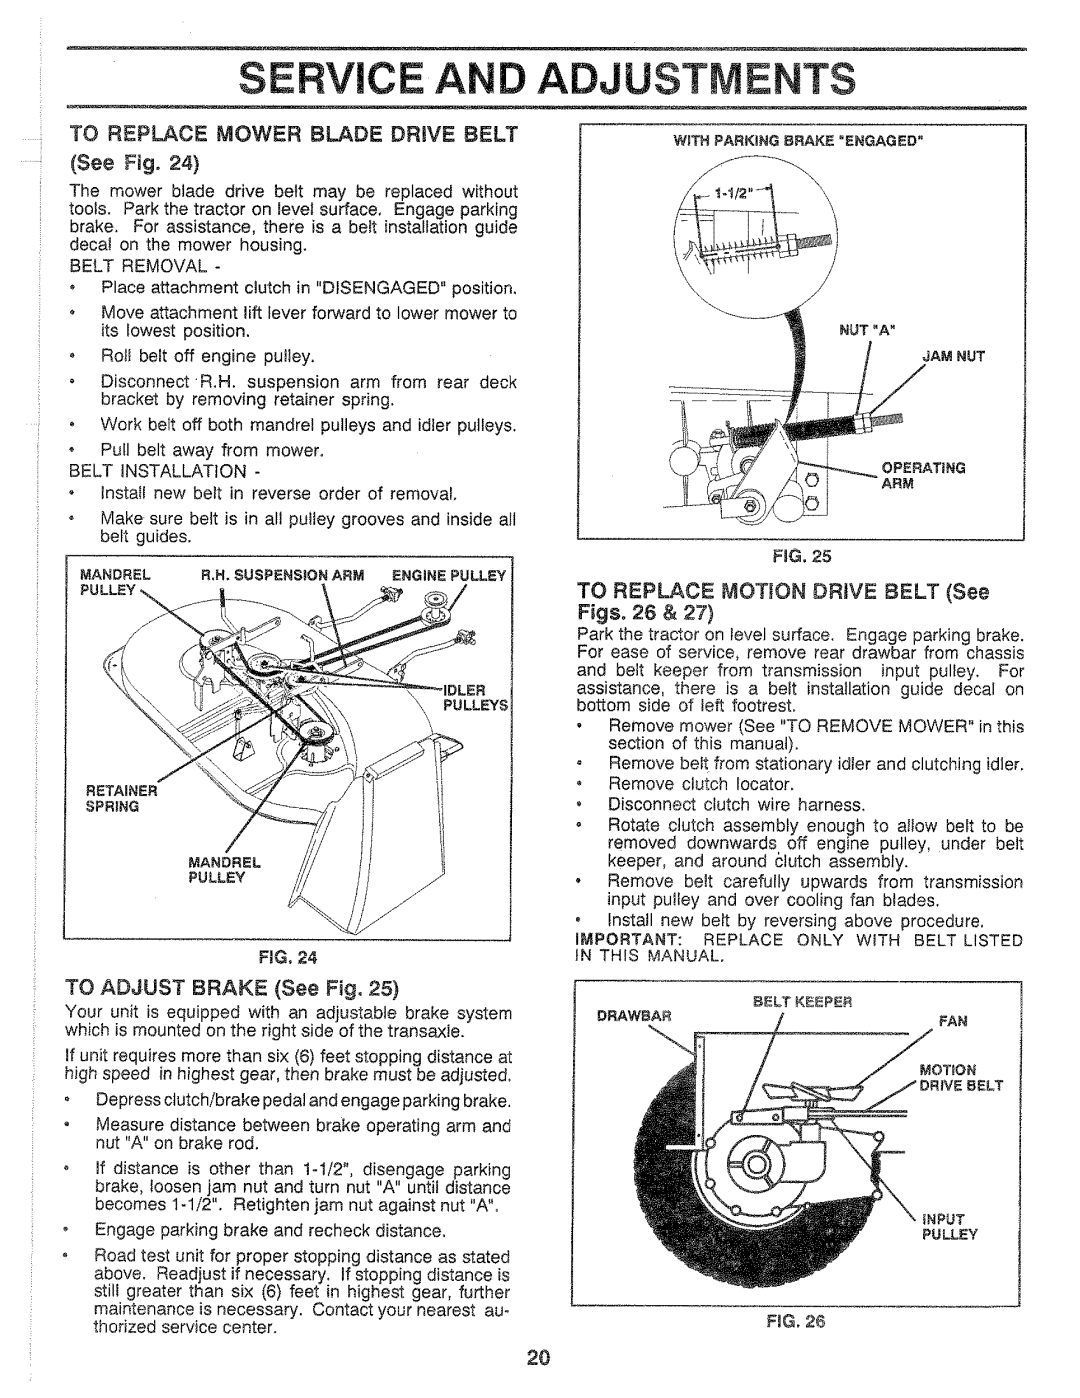 Sears 917.25559 manual Service An, Adjustments, To Replace Mower Blade Drive Belt, TO ADJUST BRAKE See Fig, ,!5, Pulley 